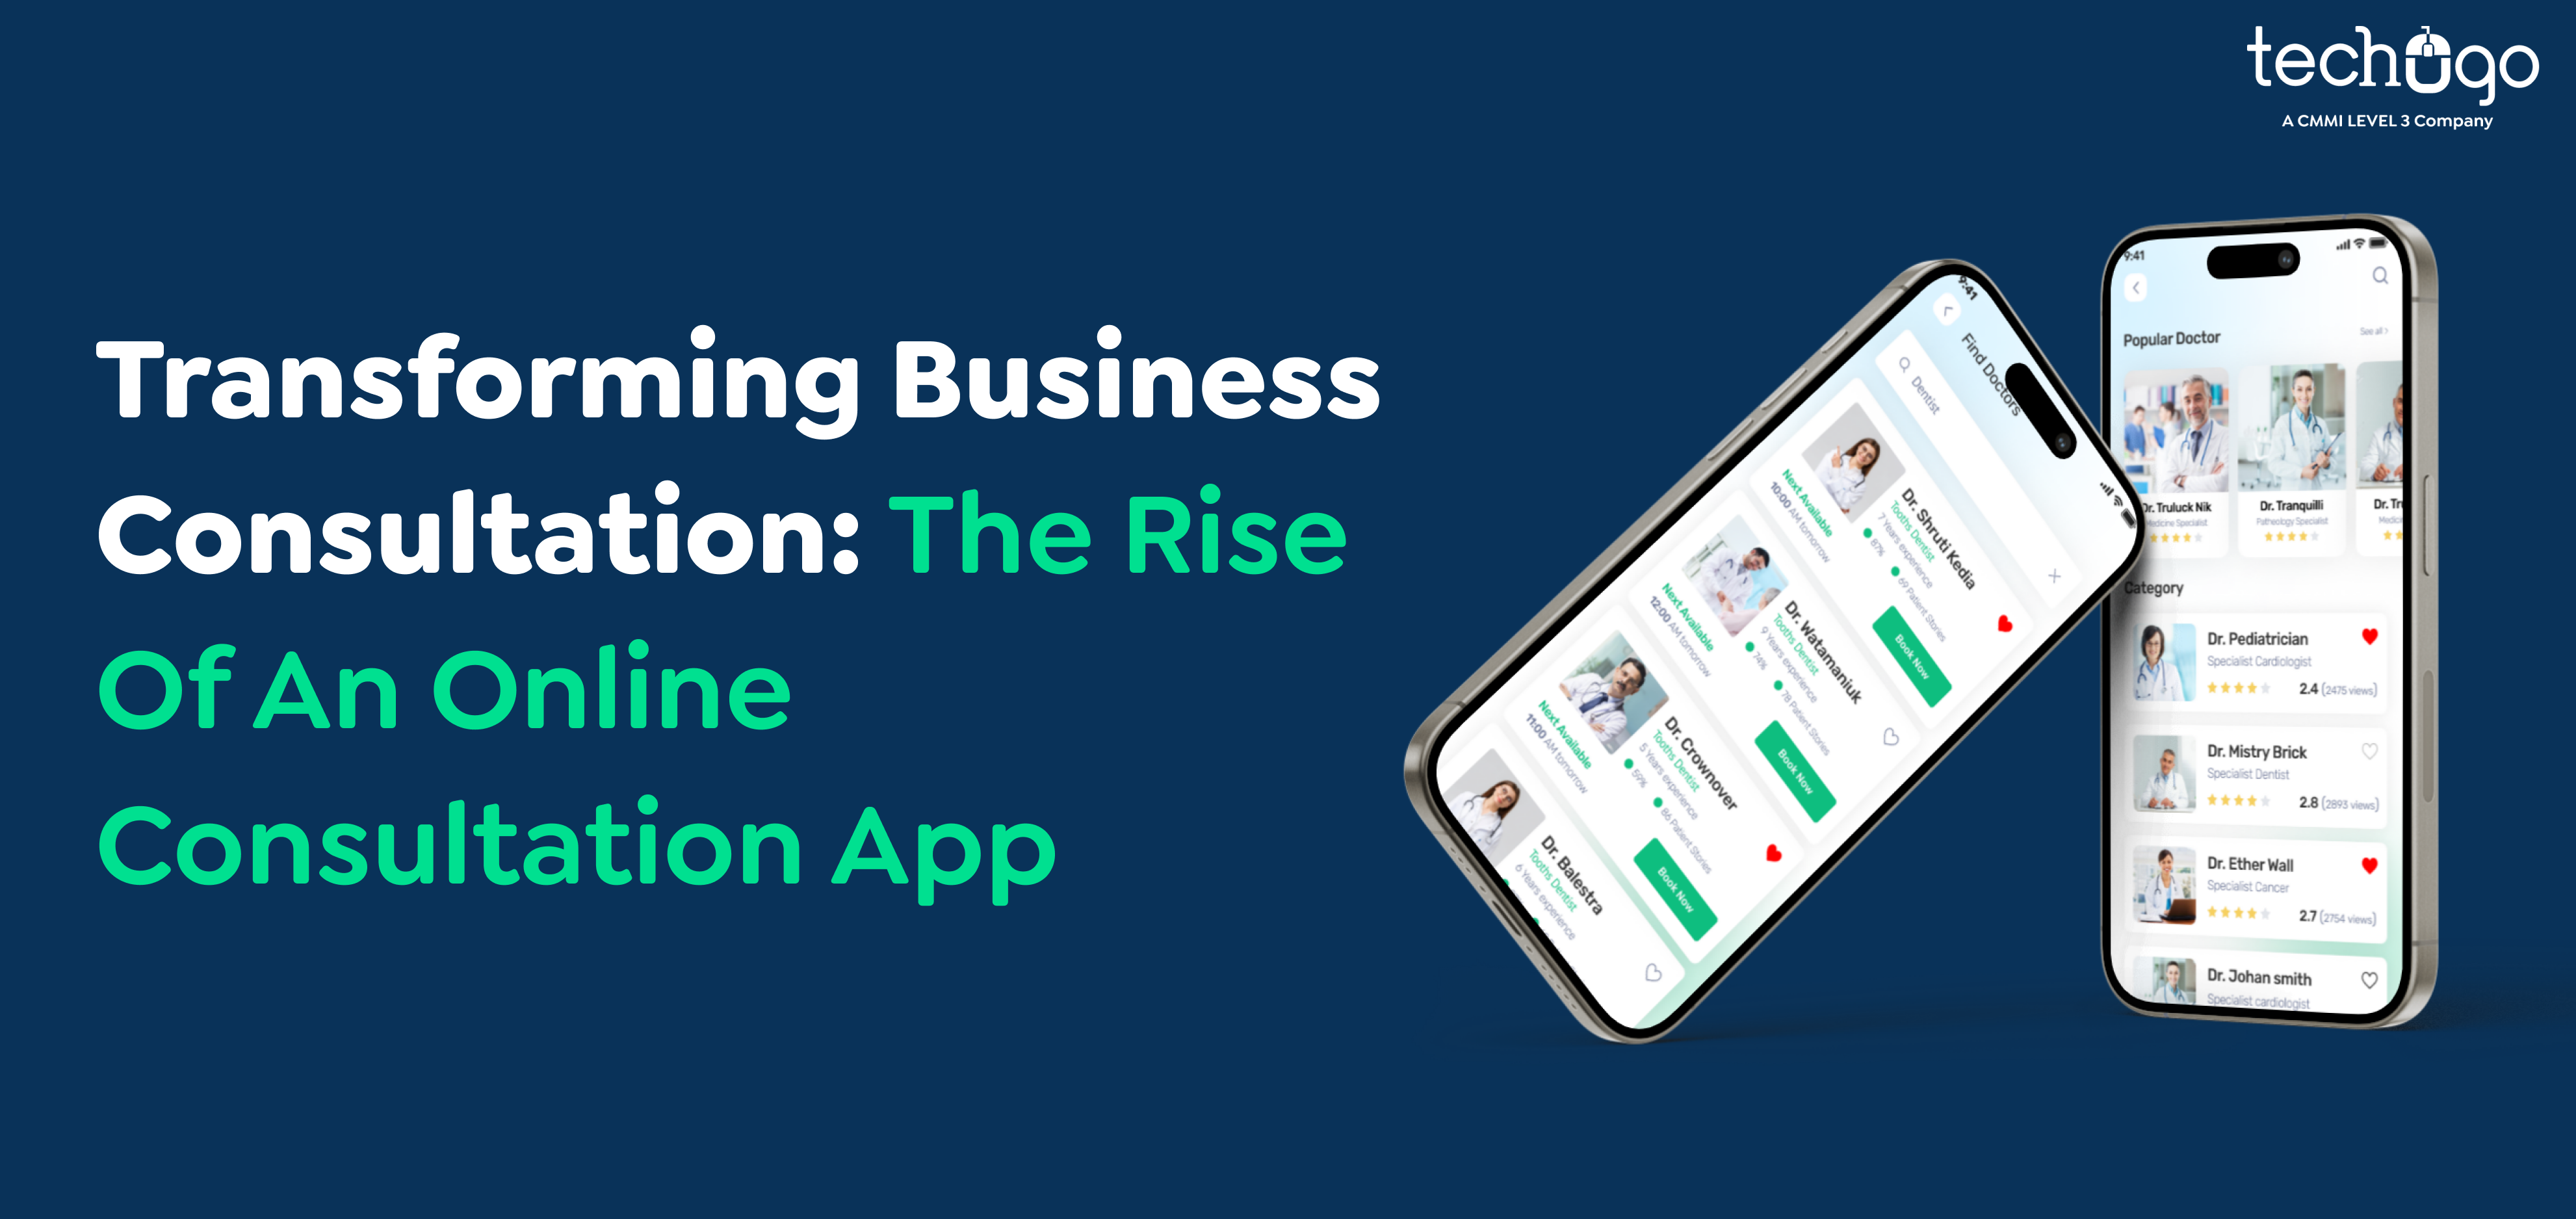 Transforming Business Consultation: The Rise Of An Online Consultation App